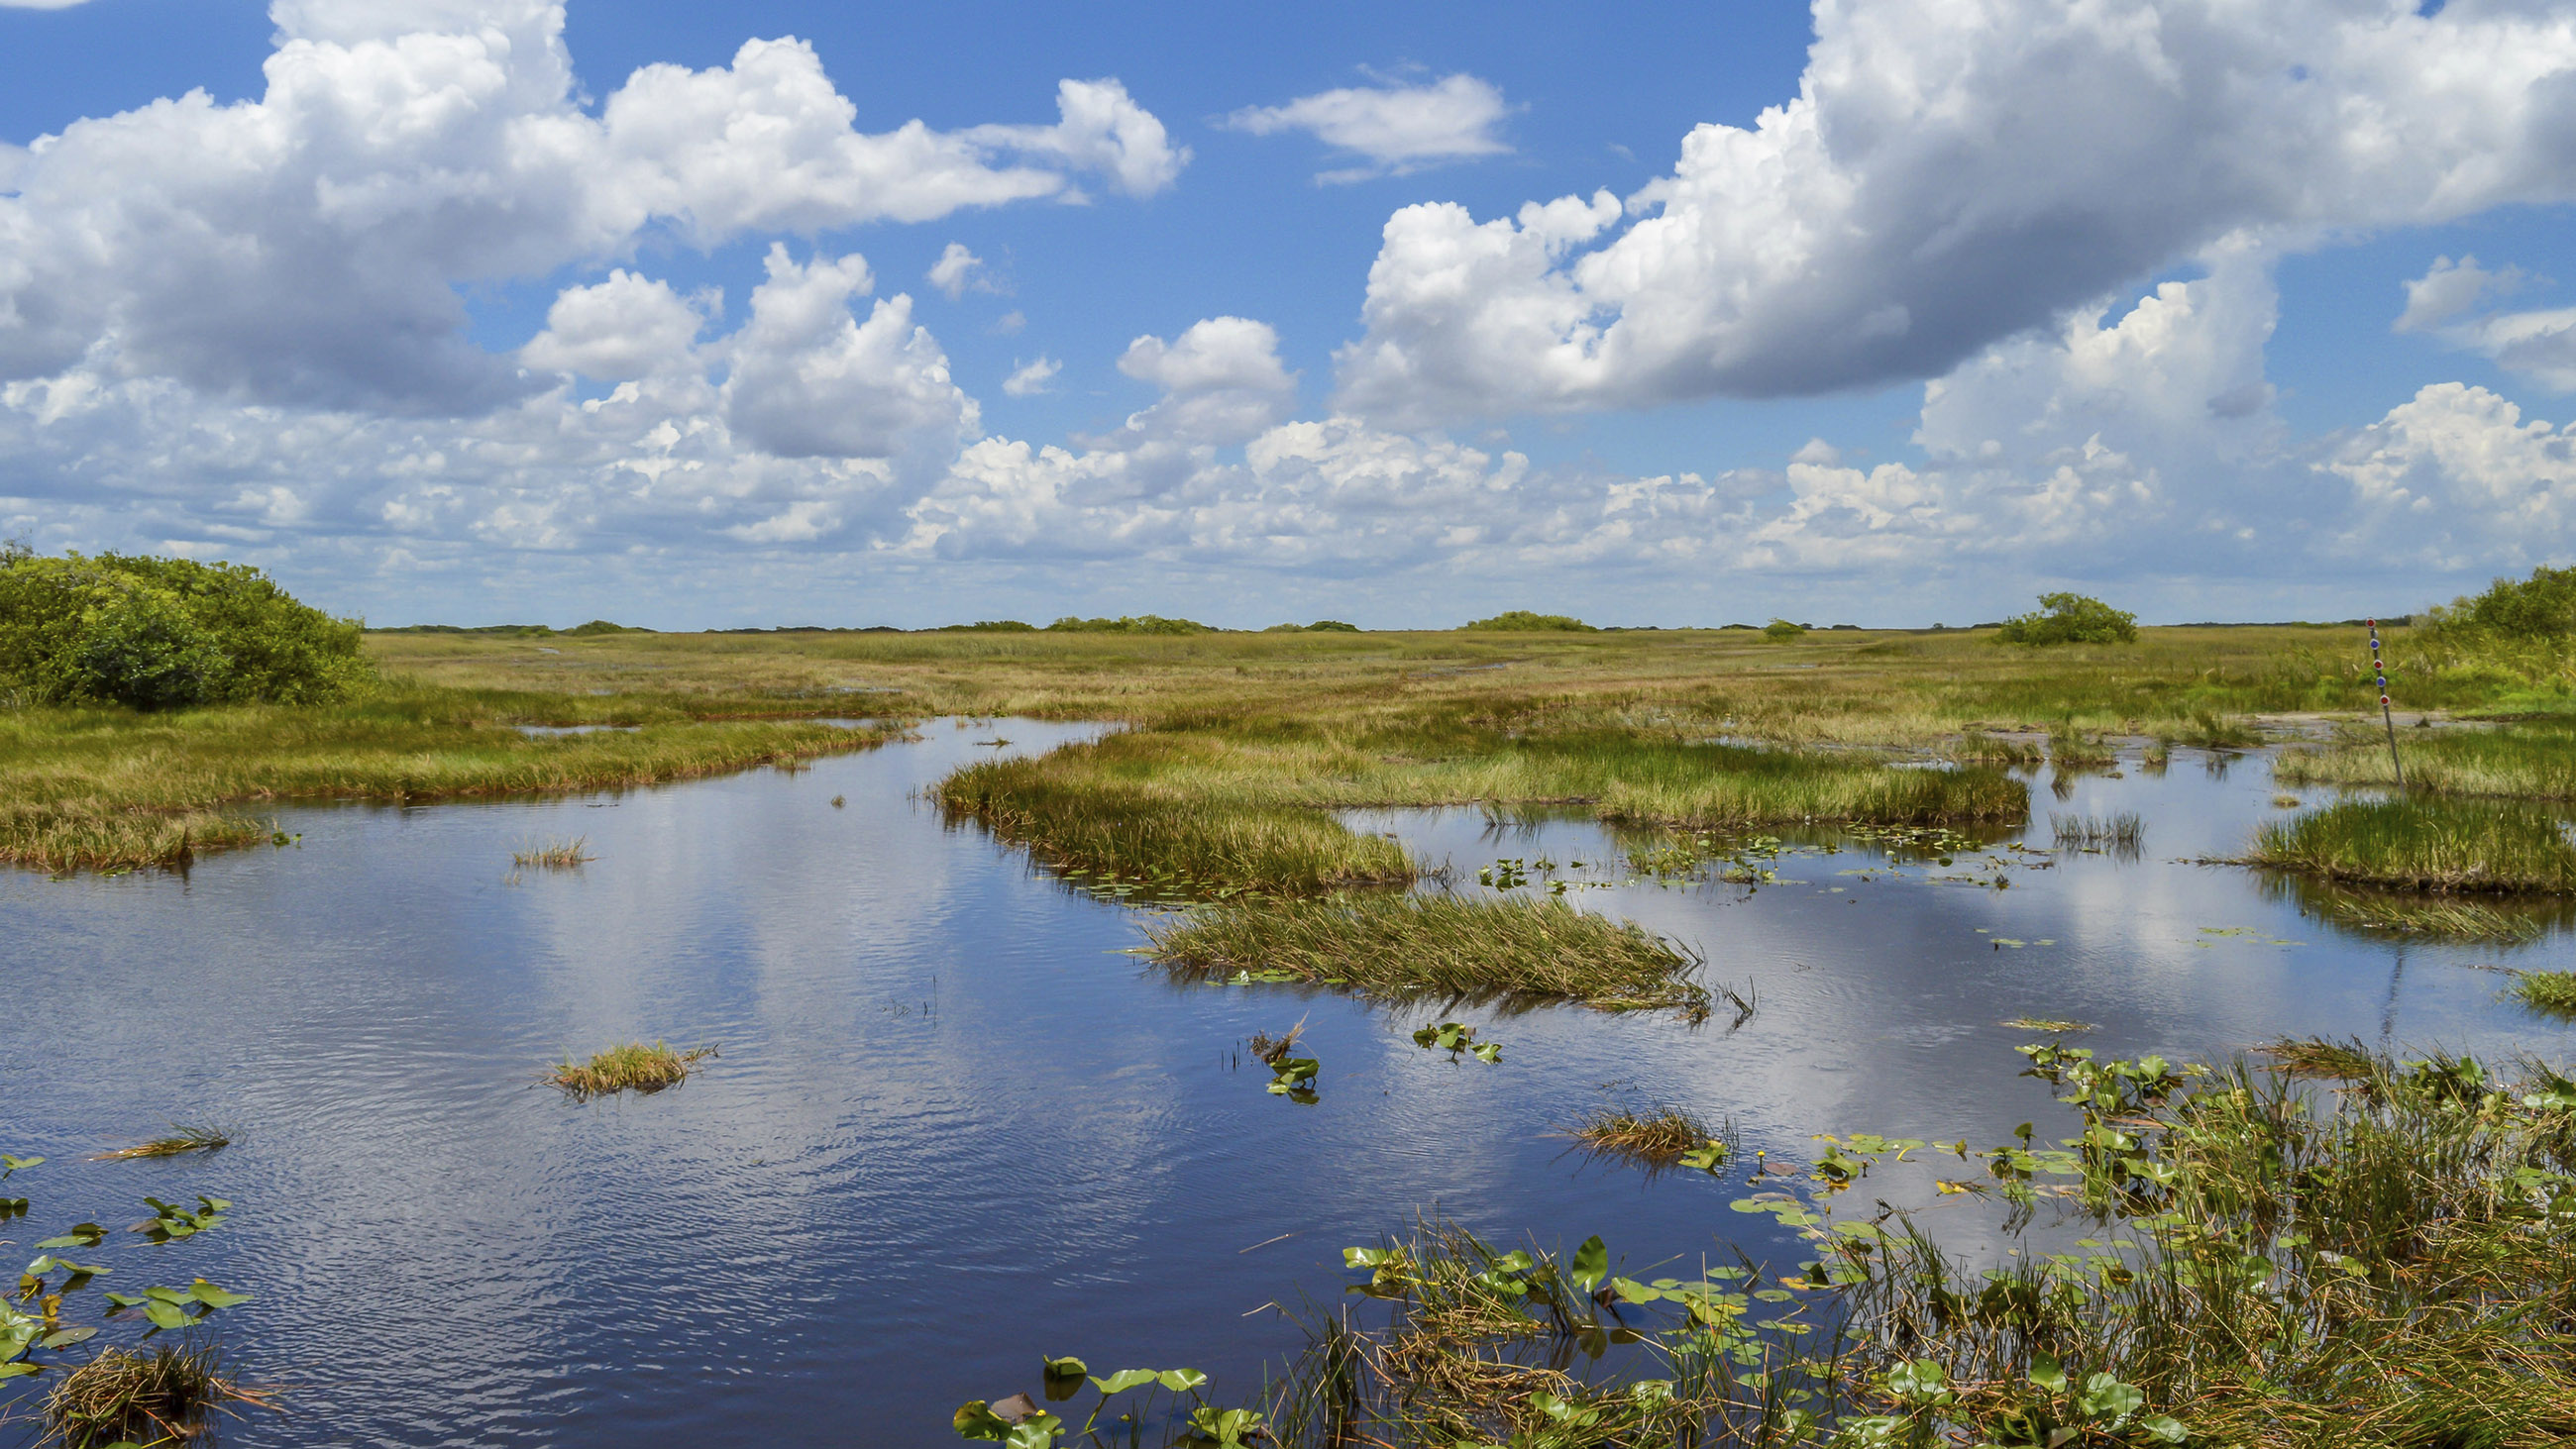 Before they were filled in and built over, channels connected Florida's Everglades to the Atlantic Ocean. That's a lesson Miami is re-learning.